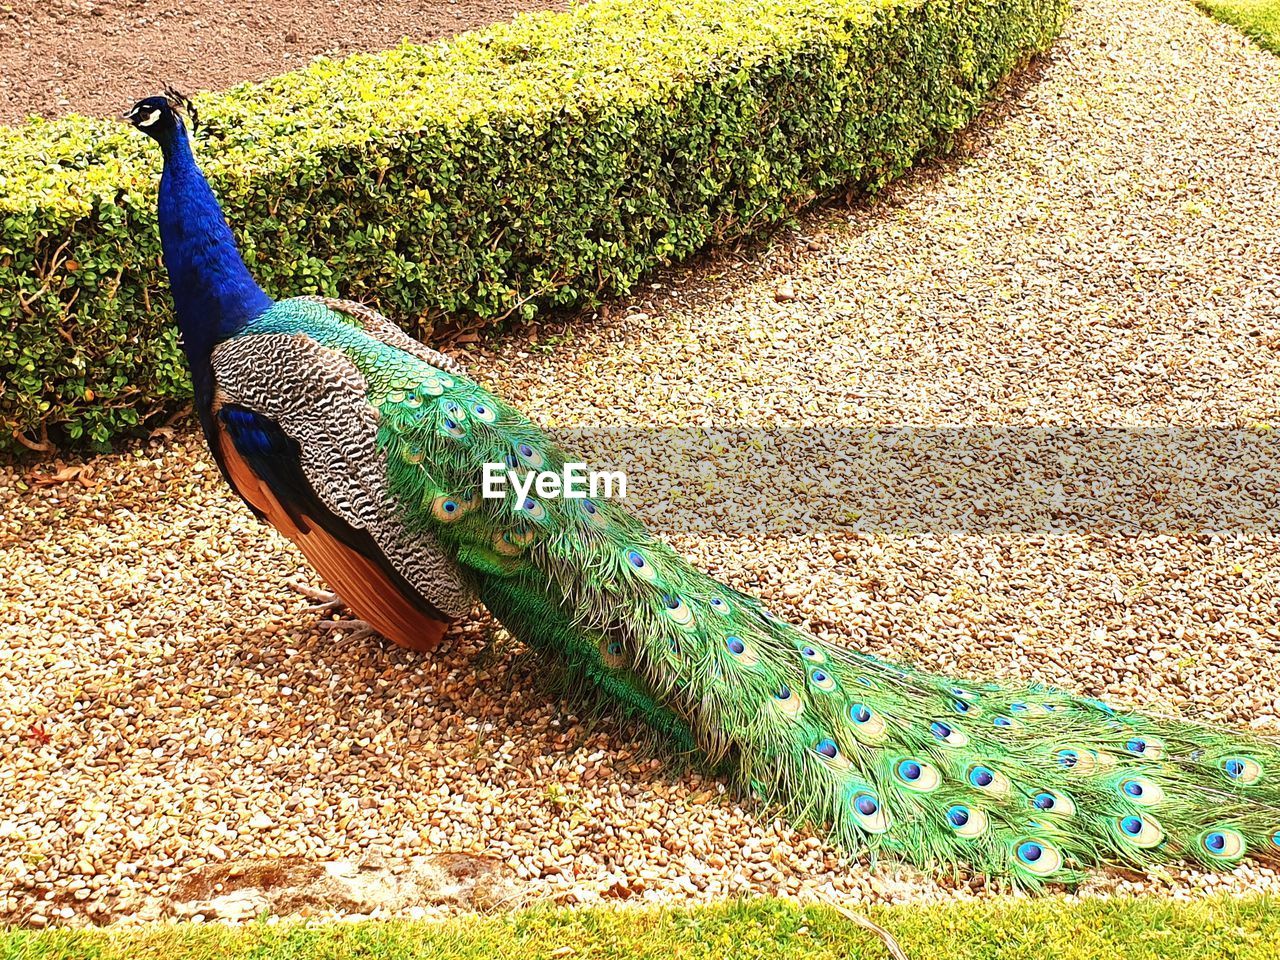 HIGH ANGLE VIEW OF PEACOCK ON GRASS